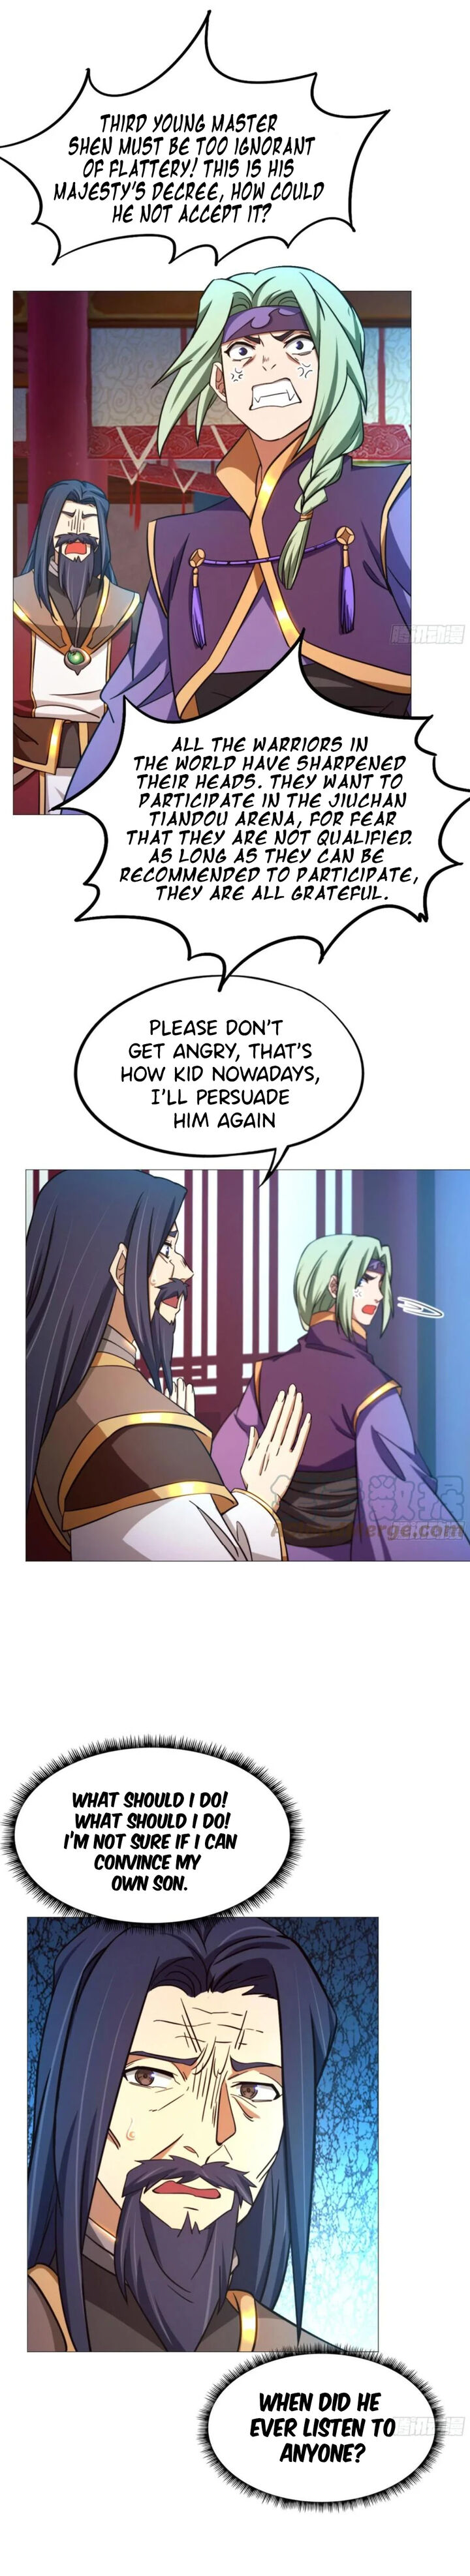 Everlasting God Of Sword Chapter 159 Page 7